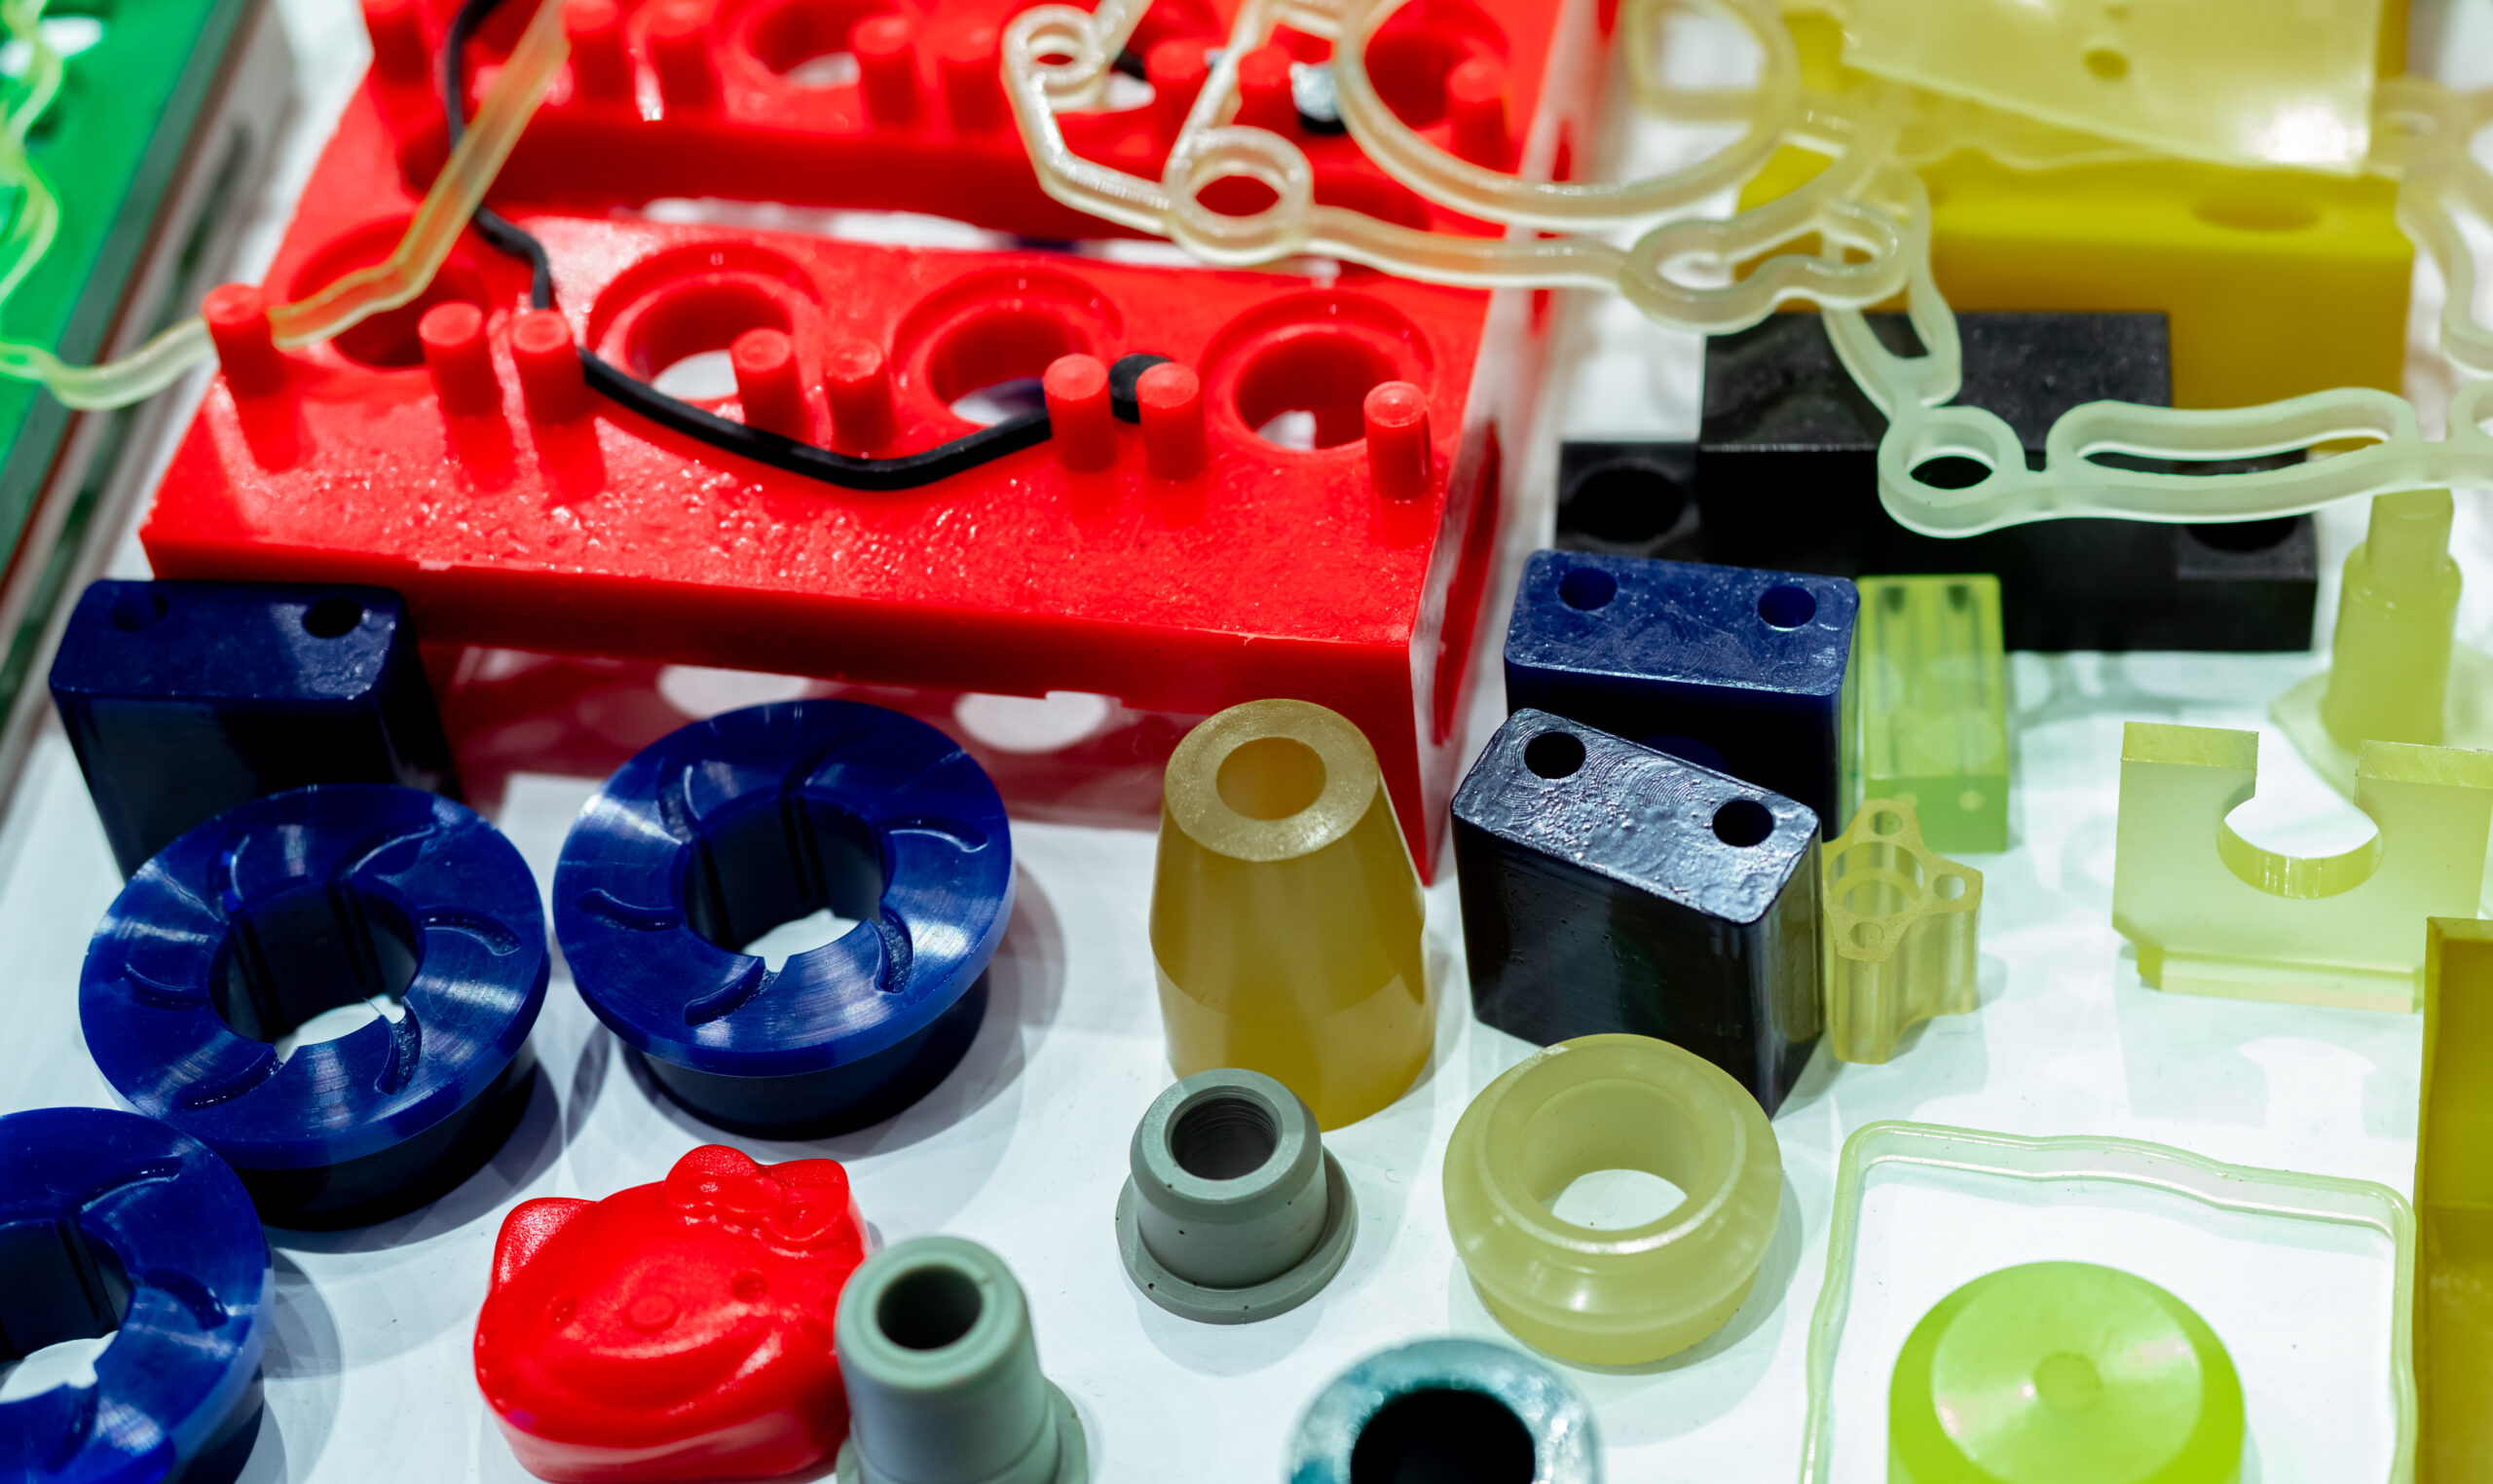 A variety of colorful thermoplastic elastomer (TPE), thermoplastic polyurethane (TPU), and Santoprene parts sitting together on display.